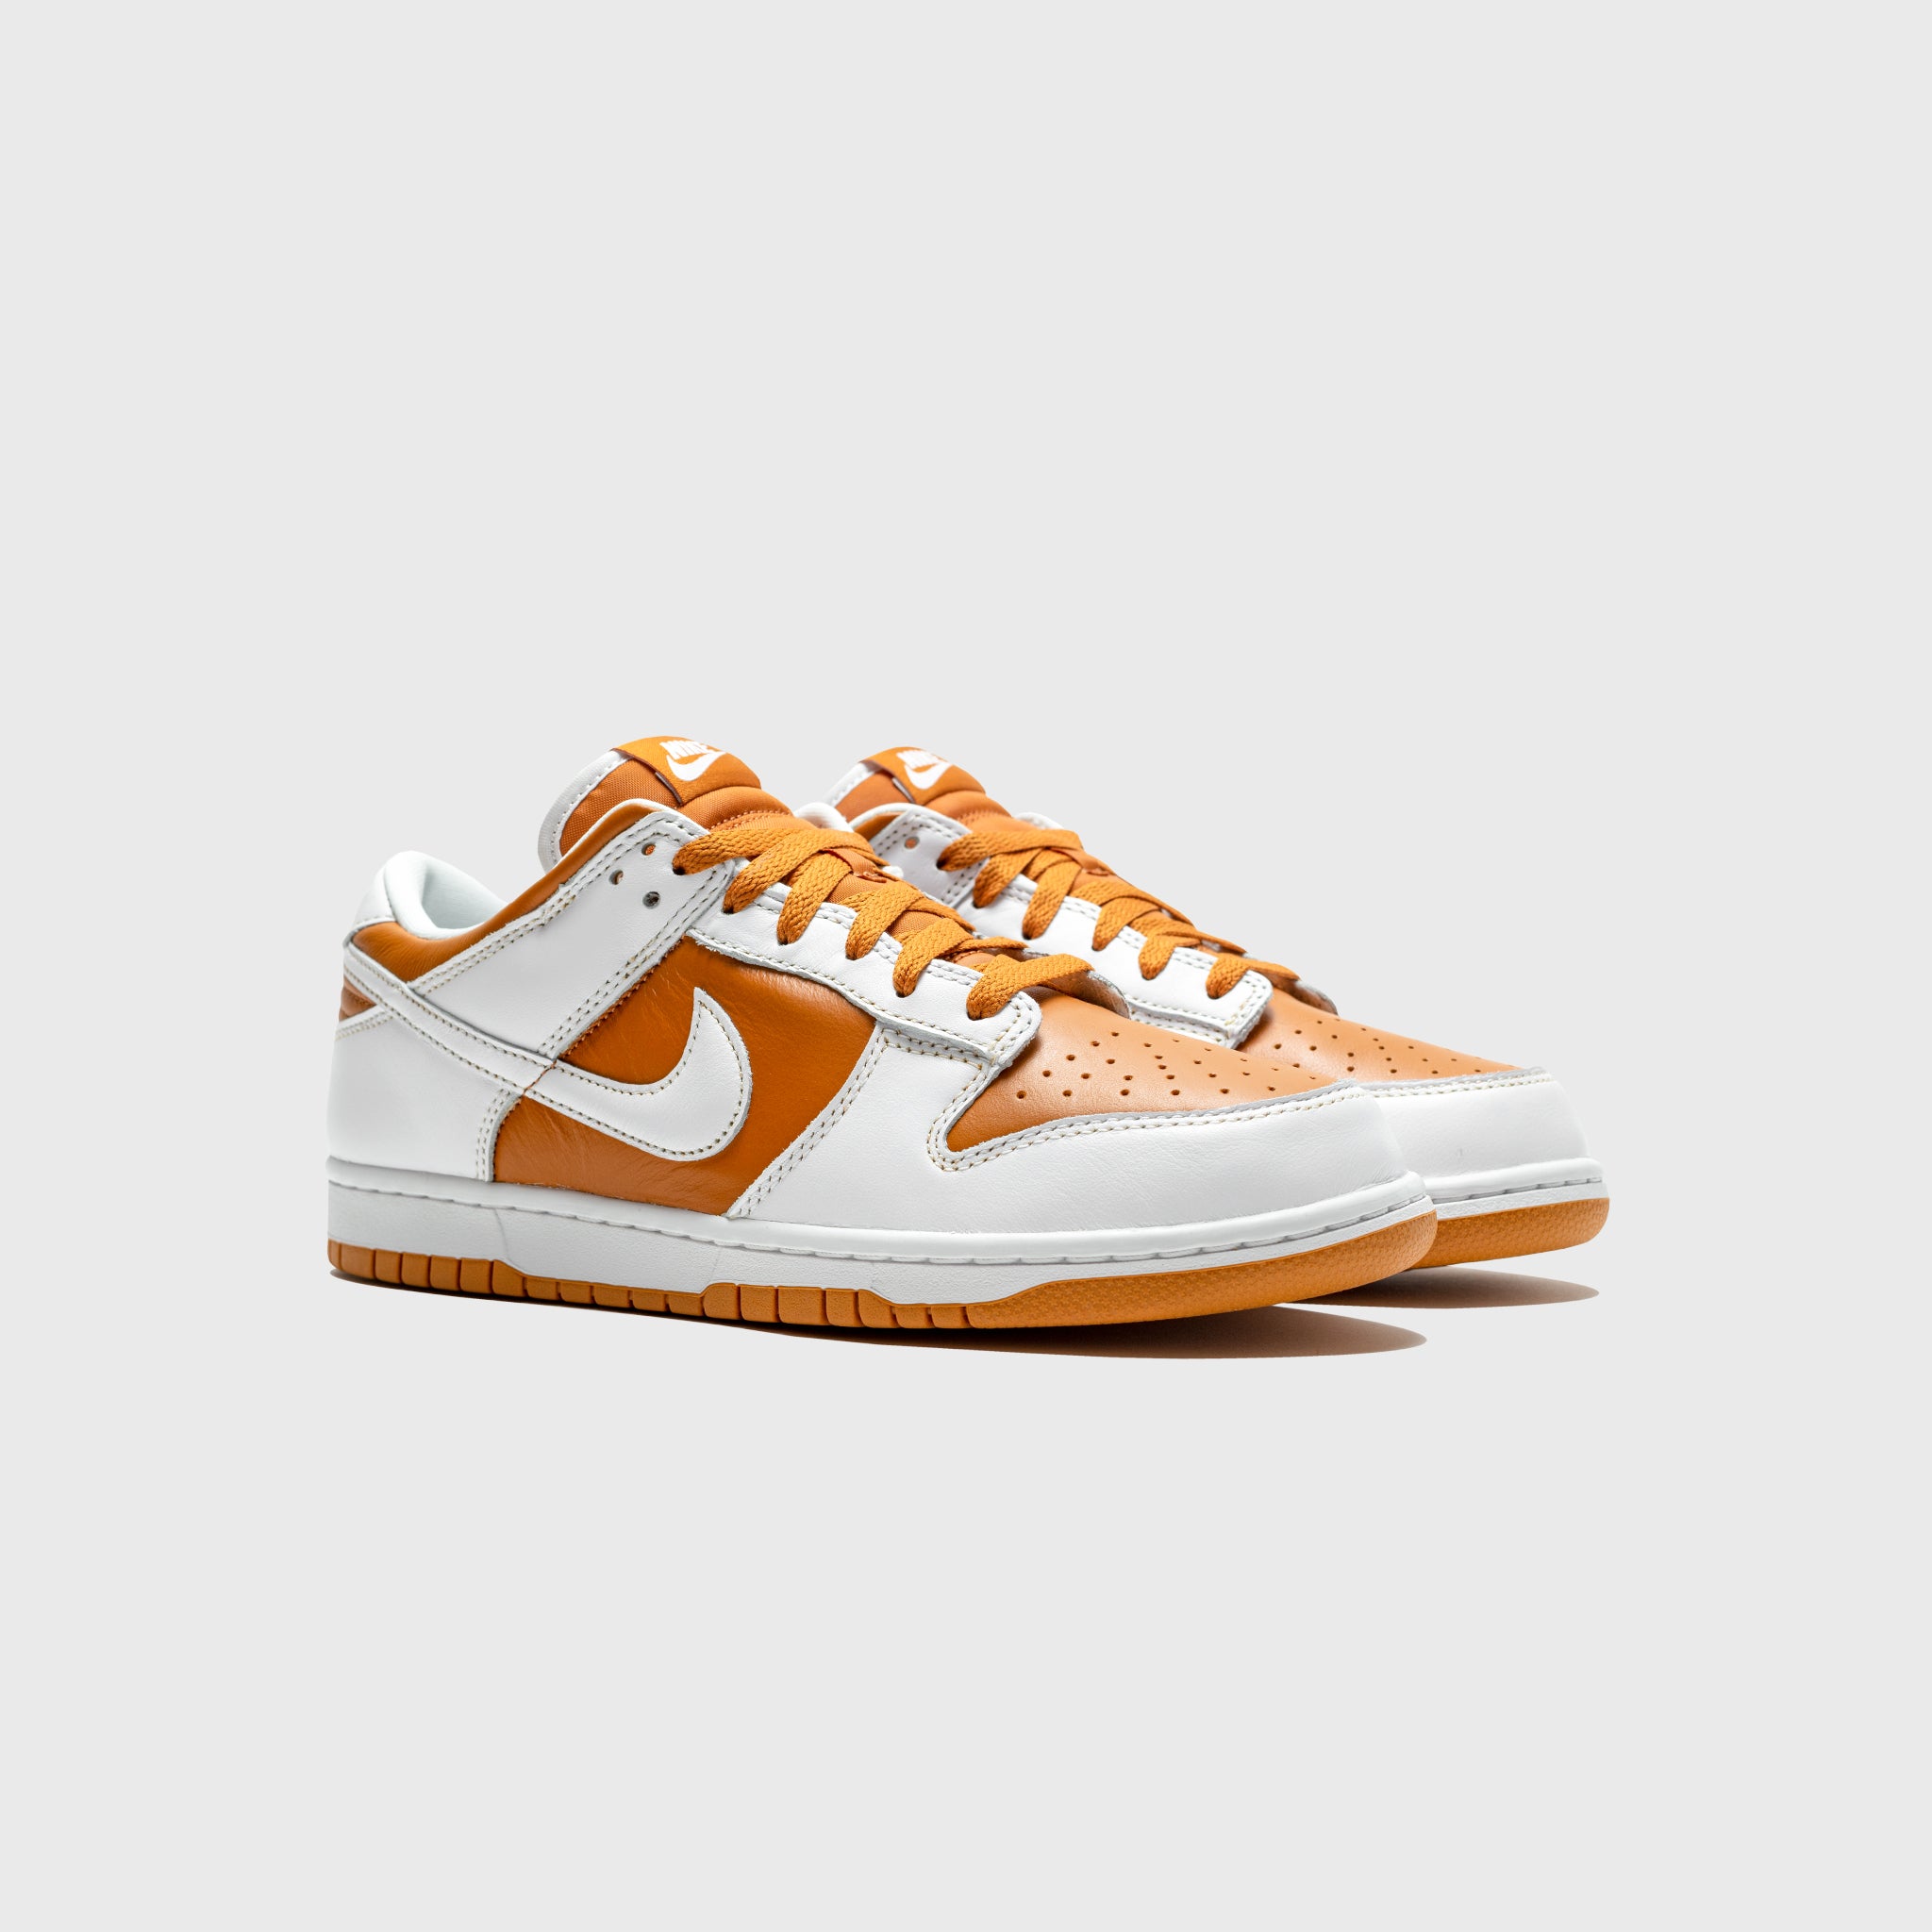 NIKE DUNK LOW QS "REVERSE CURRY"